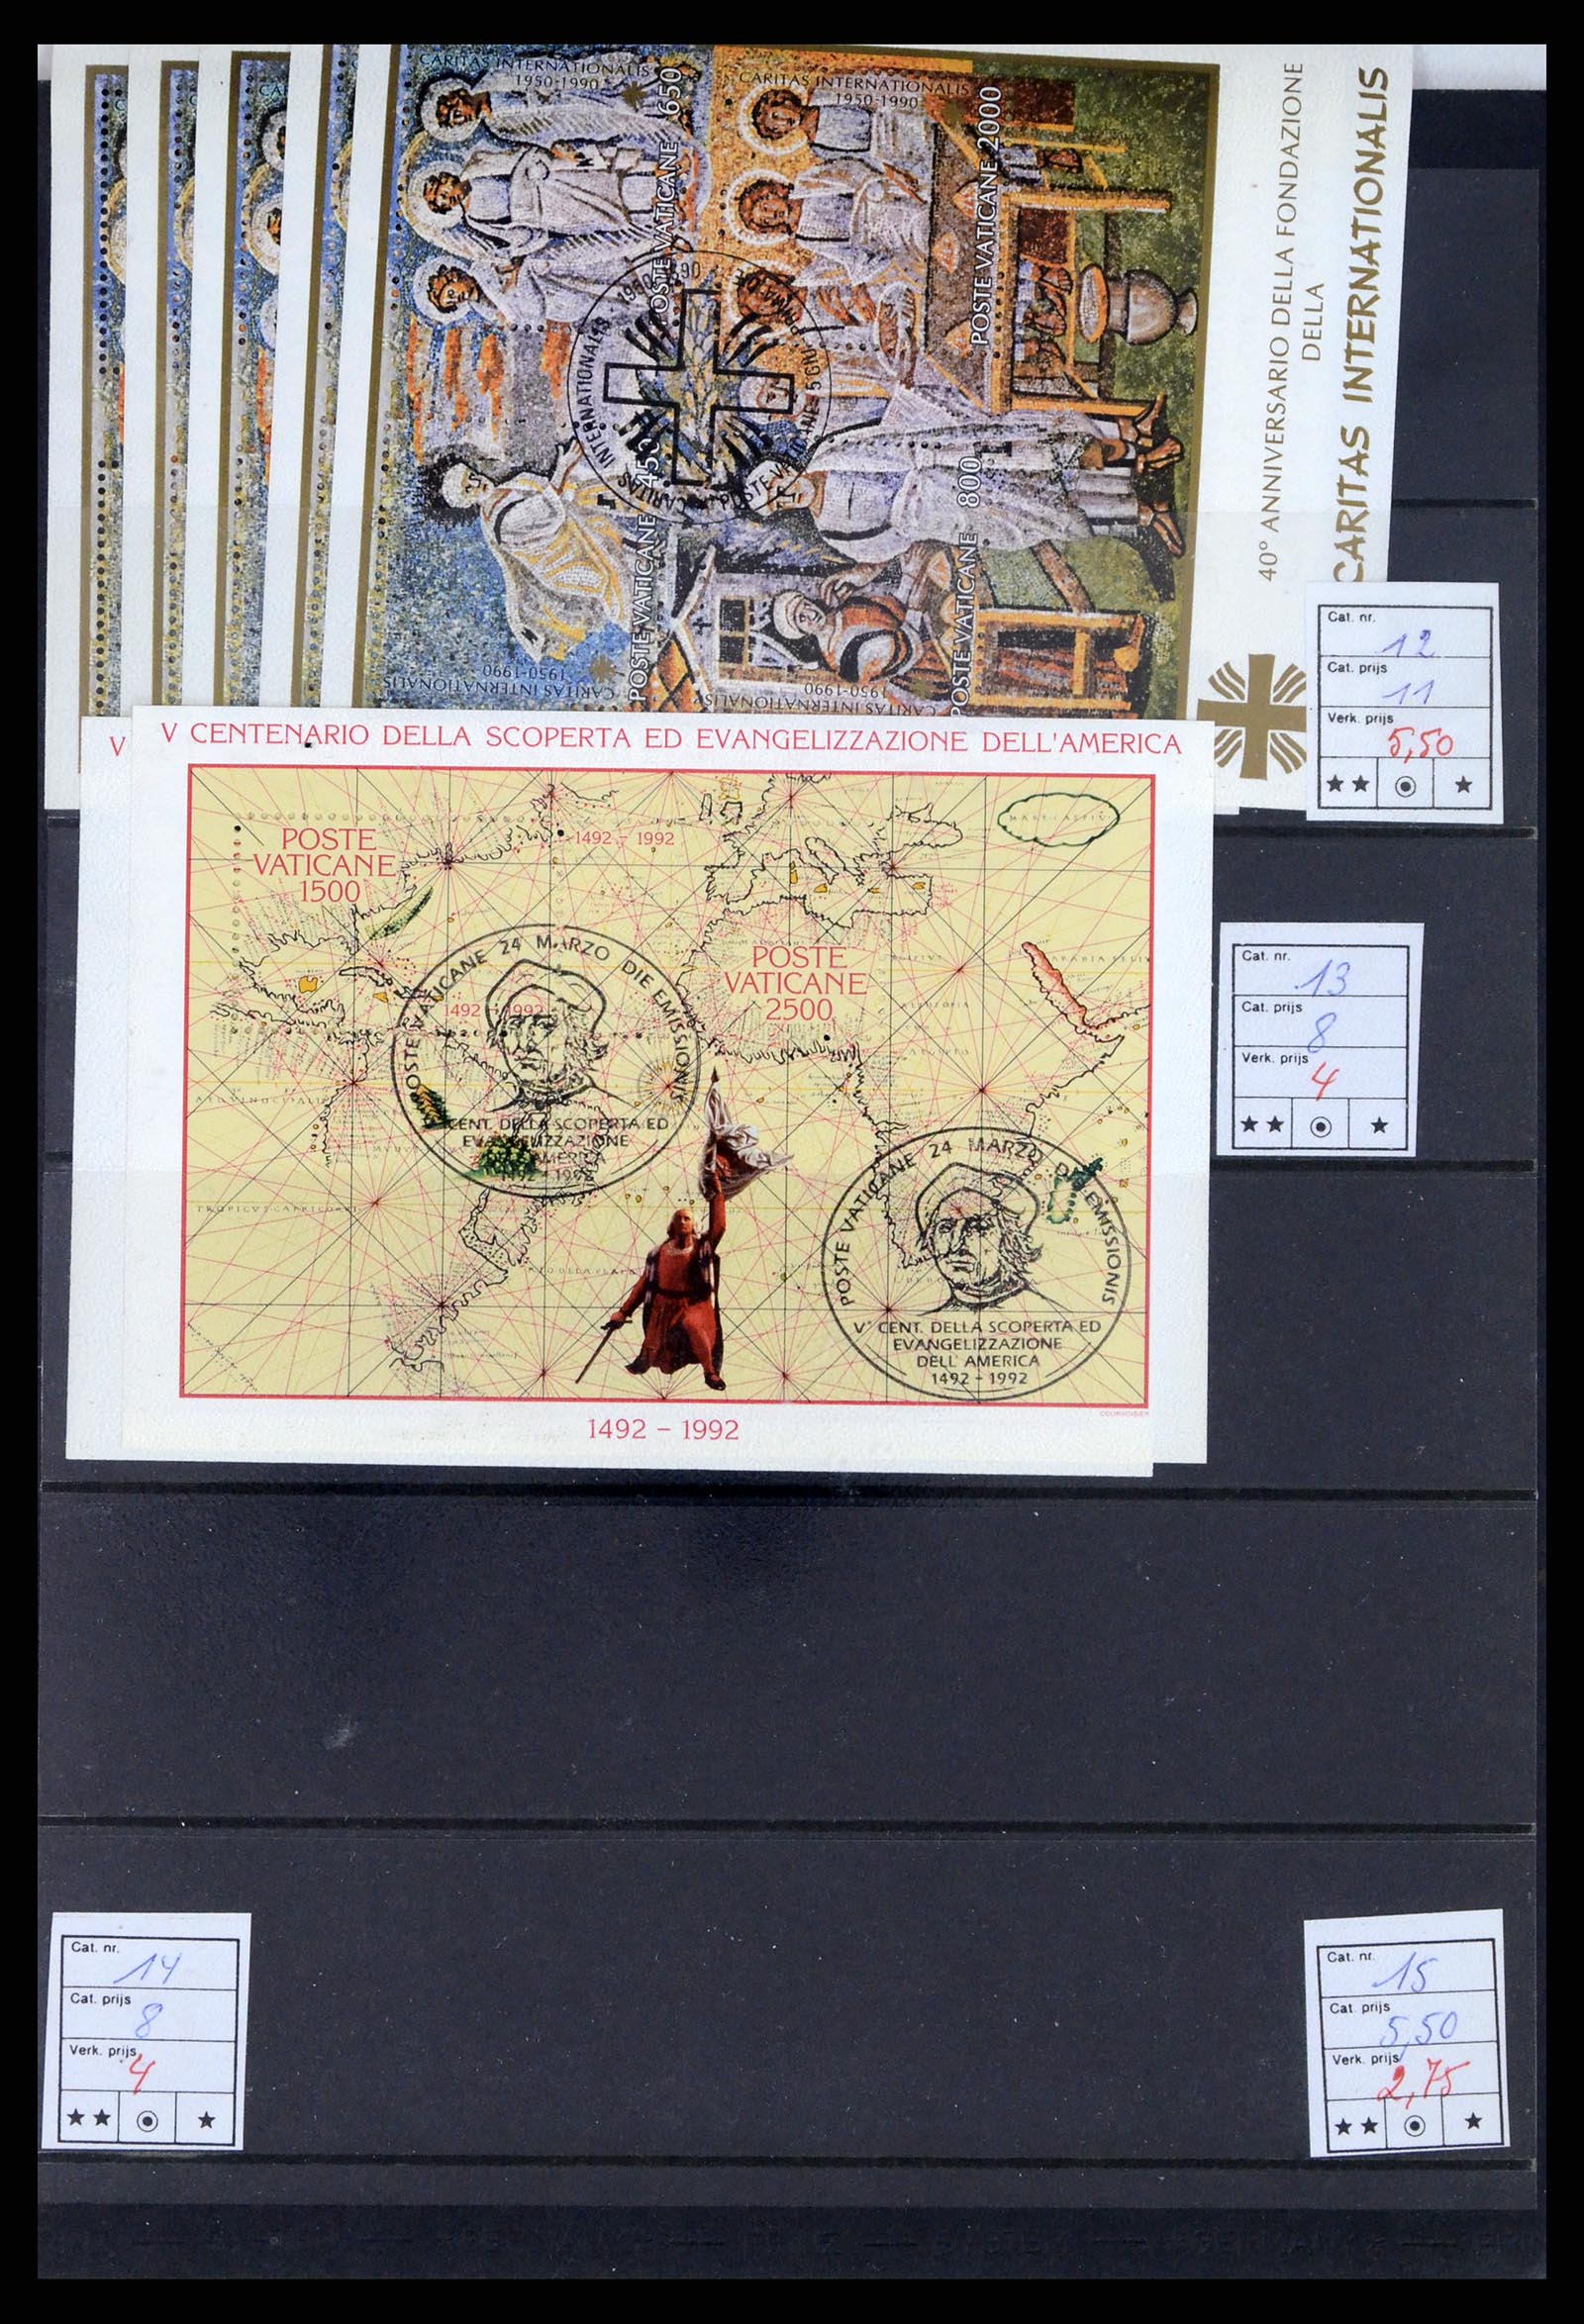 37192 217 - Stamp collection 37192 European countries souvenir sheets and booklets 1